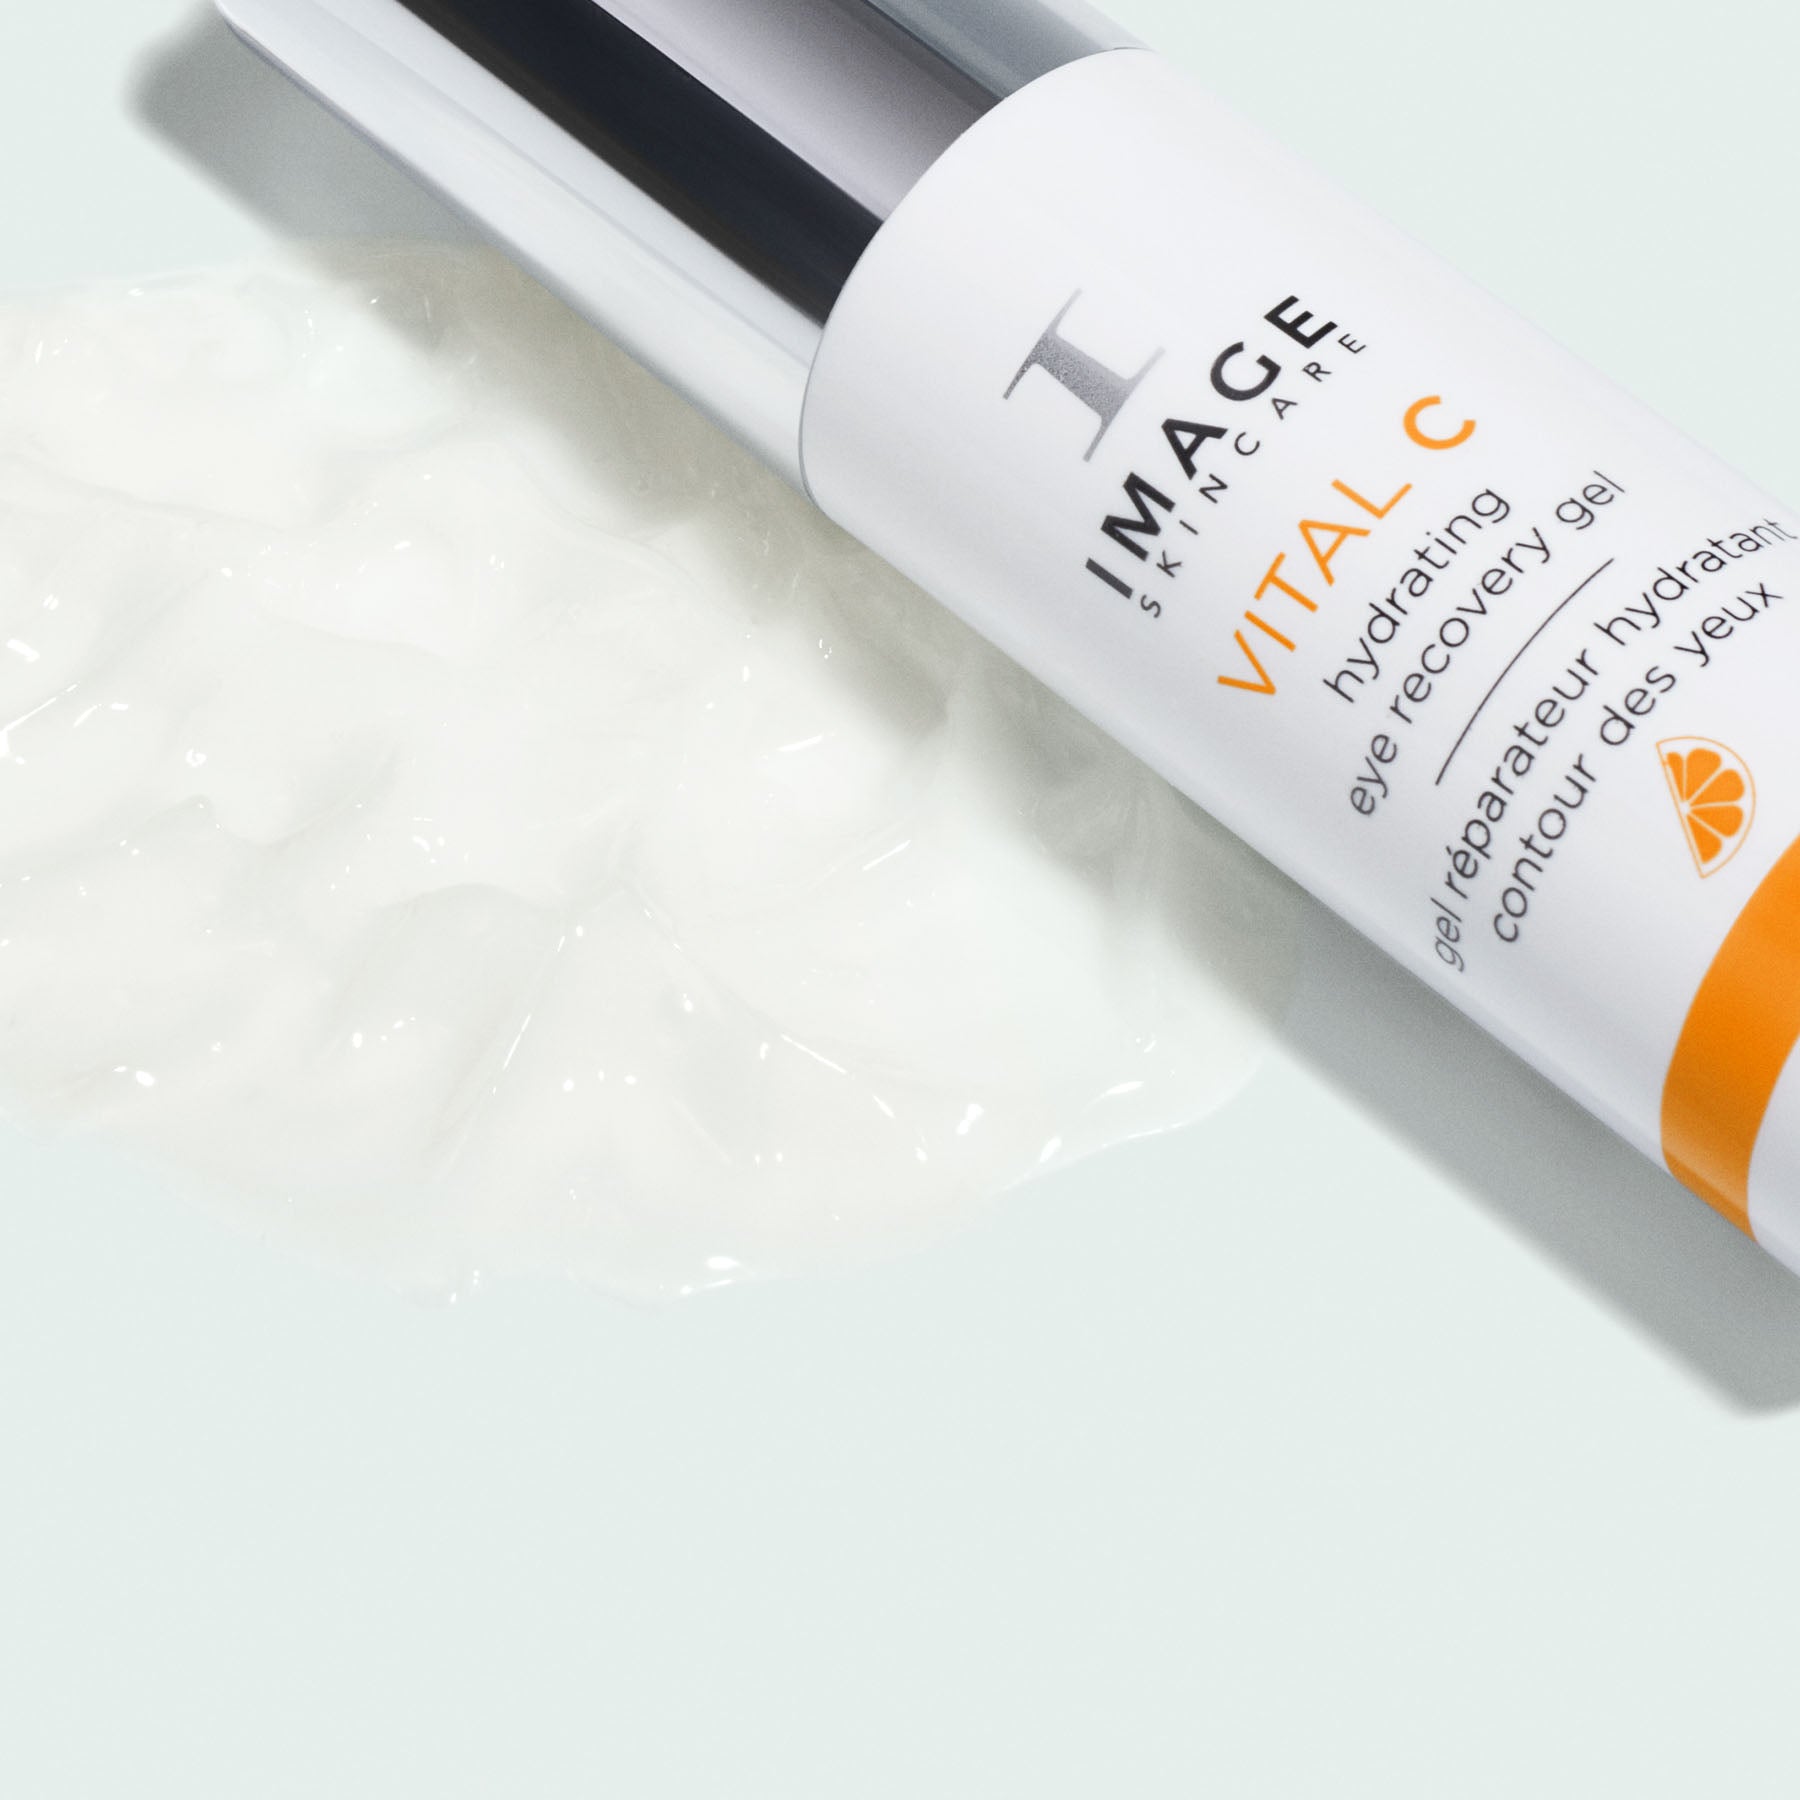 Refresh and revitalise your under-eye area with IMAGE SKINCARE Vital C Hydrating Eye Recovery Gel, a hydrating and rejuvenating gel that reduces the appearance of dark circles, puffiness, and fine lines, leaving your eyes looking bright, refreshed, and youthful.